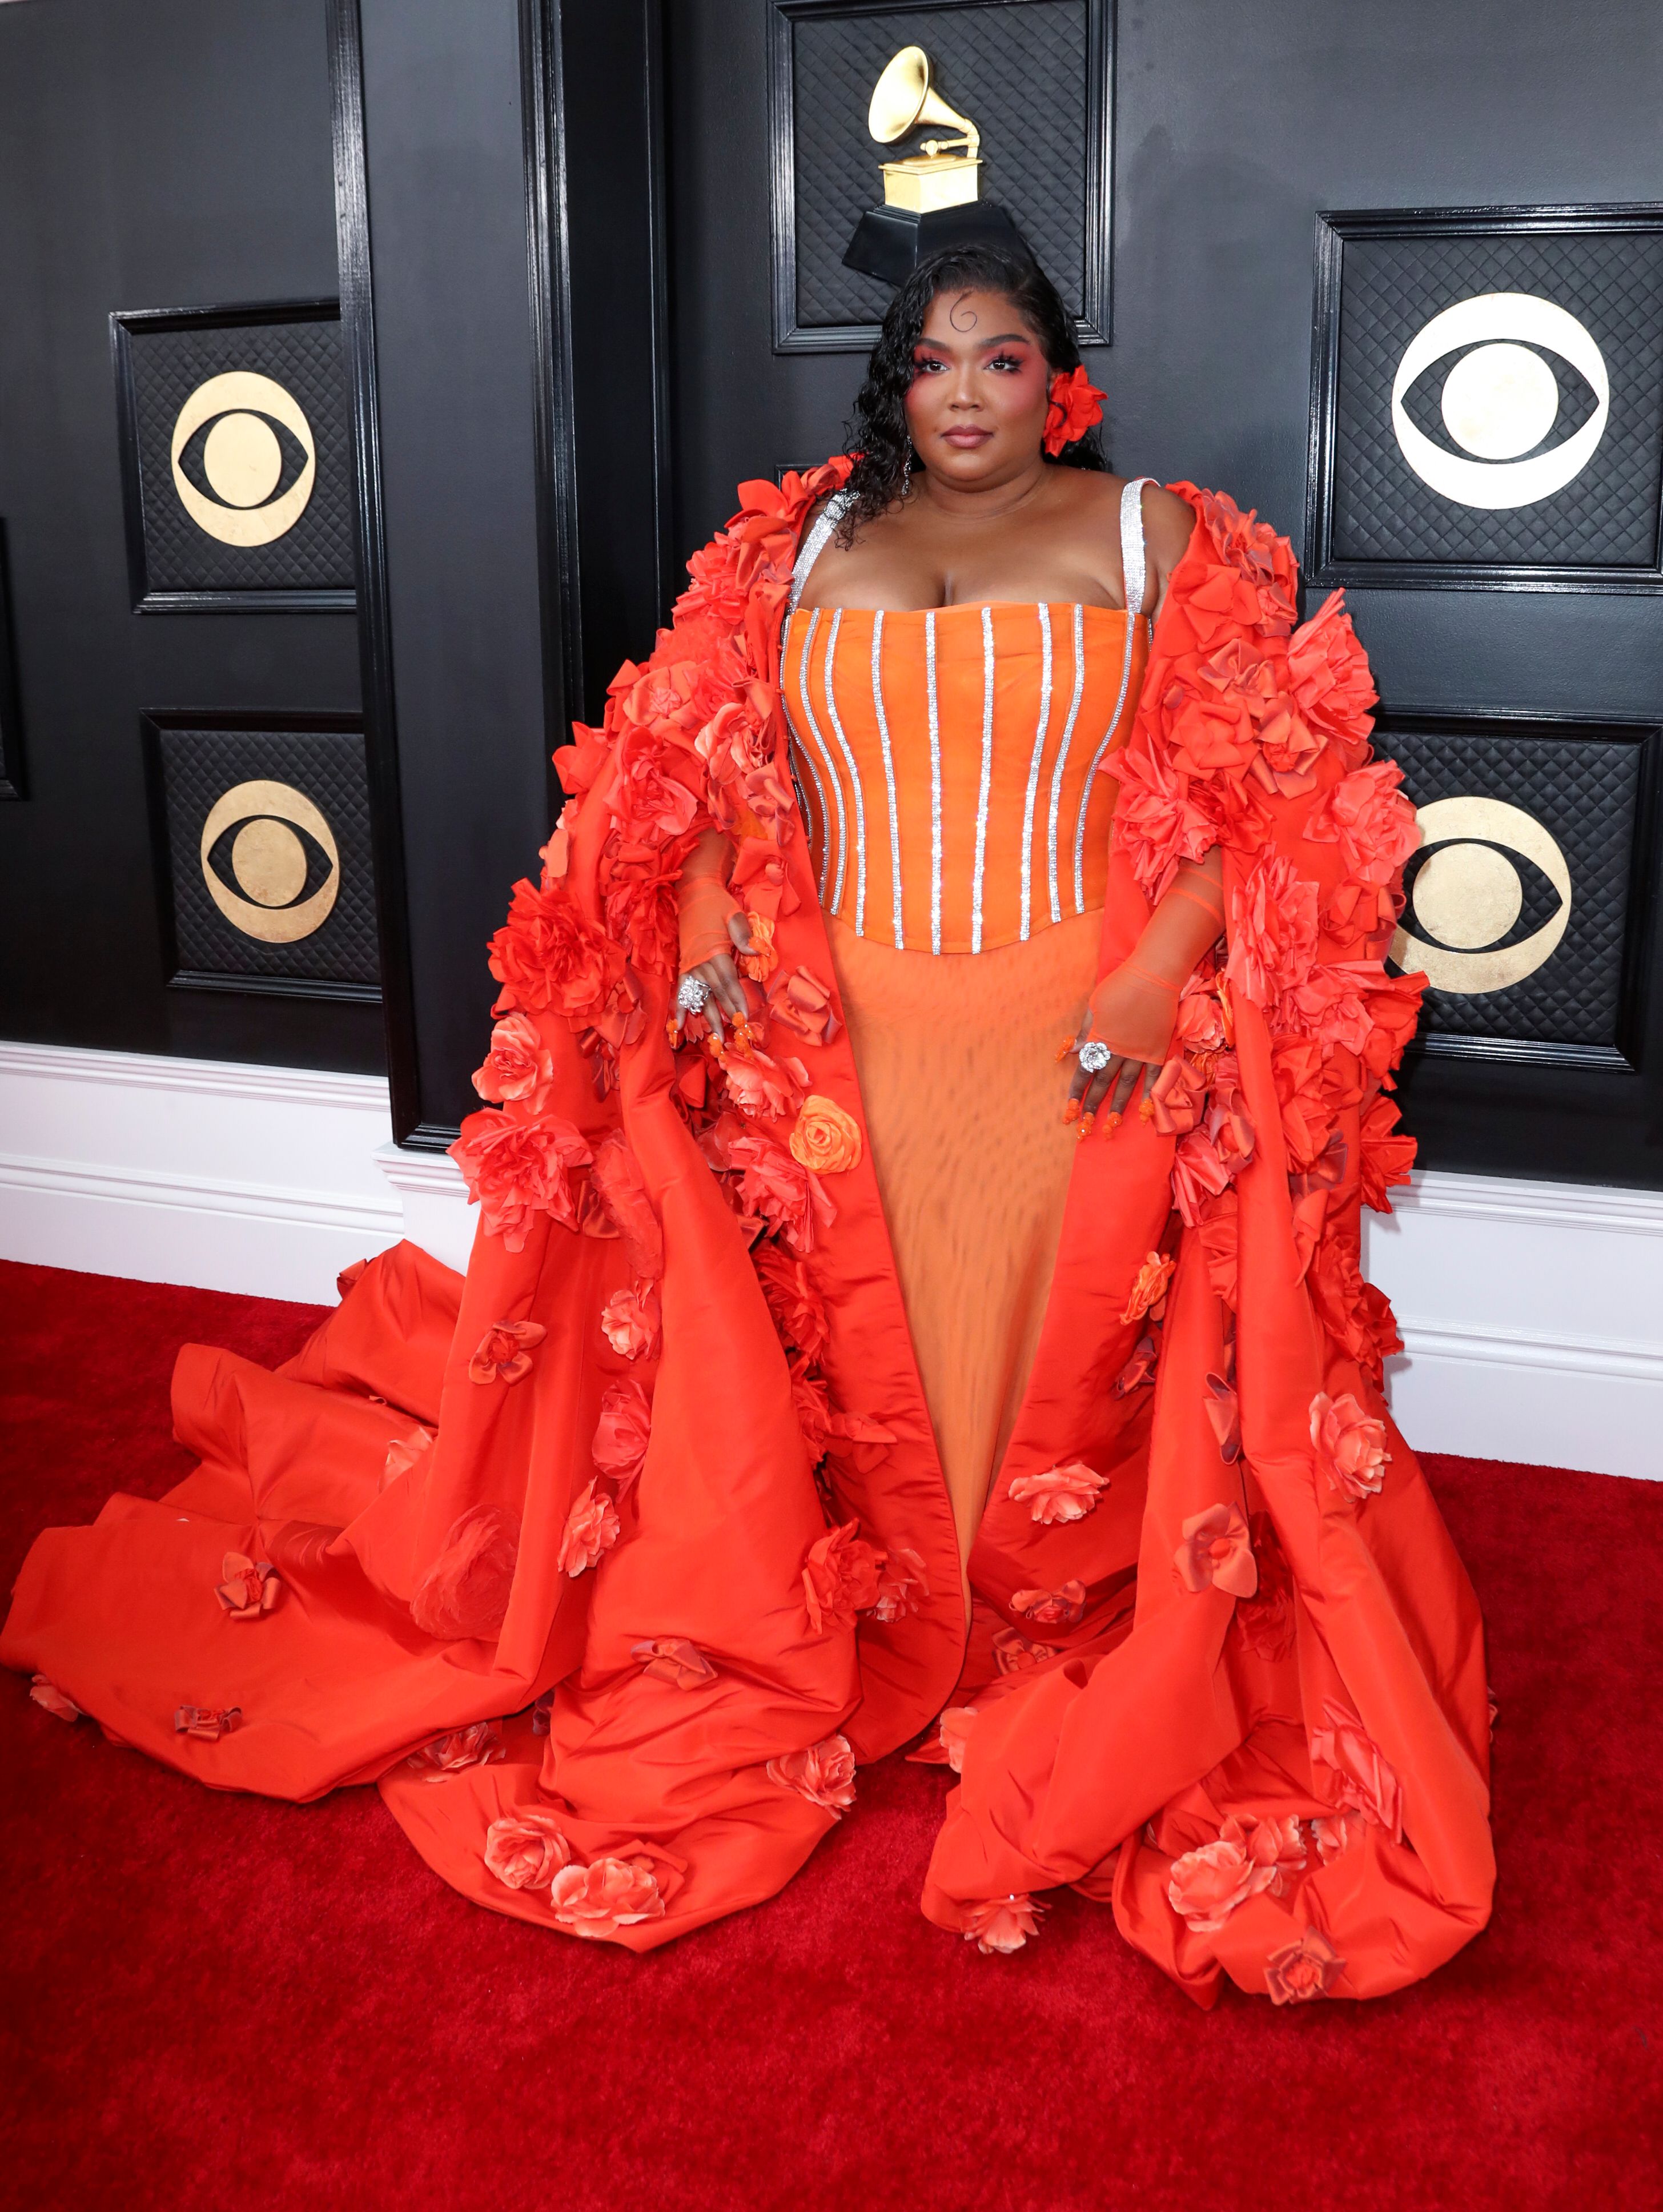 Grammys 2023 Red Carpet Photos: Young Hollywood Stars